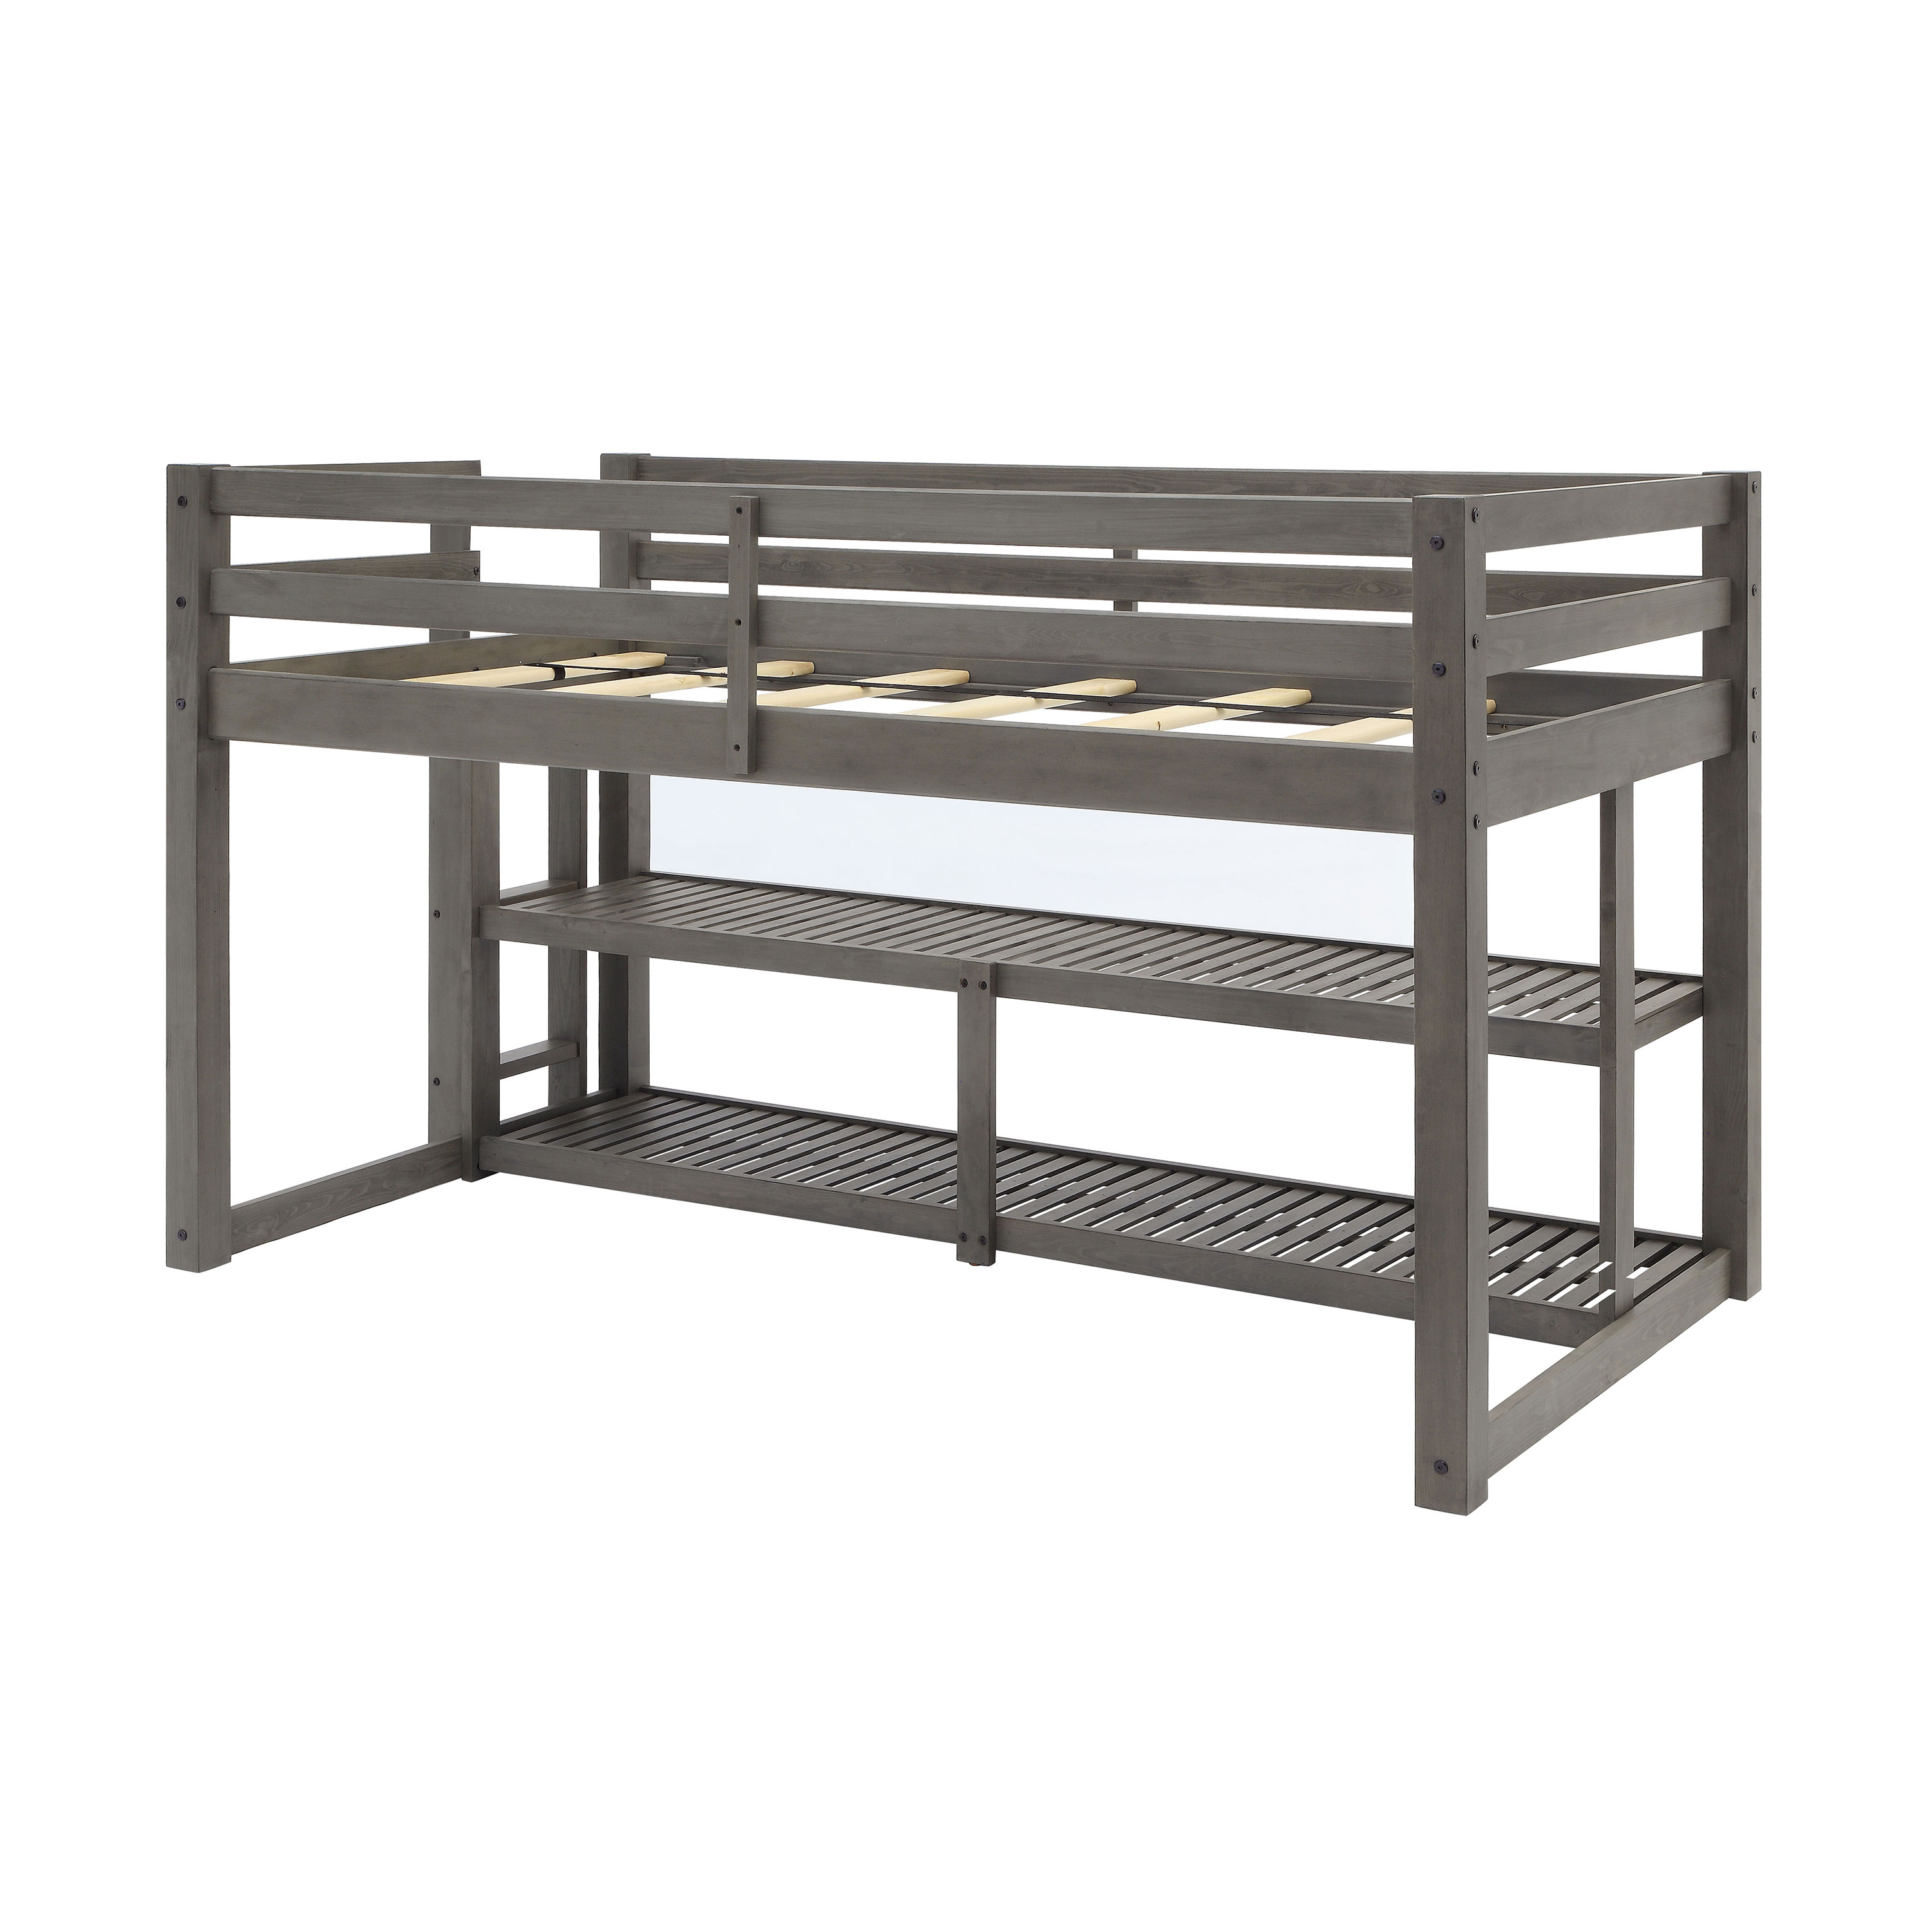 Better Homes and Gardens Greer Twin Loft Storage Bed, Gray - image 11 of 11